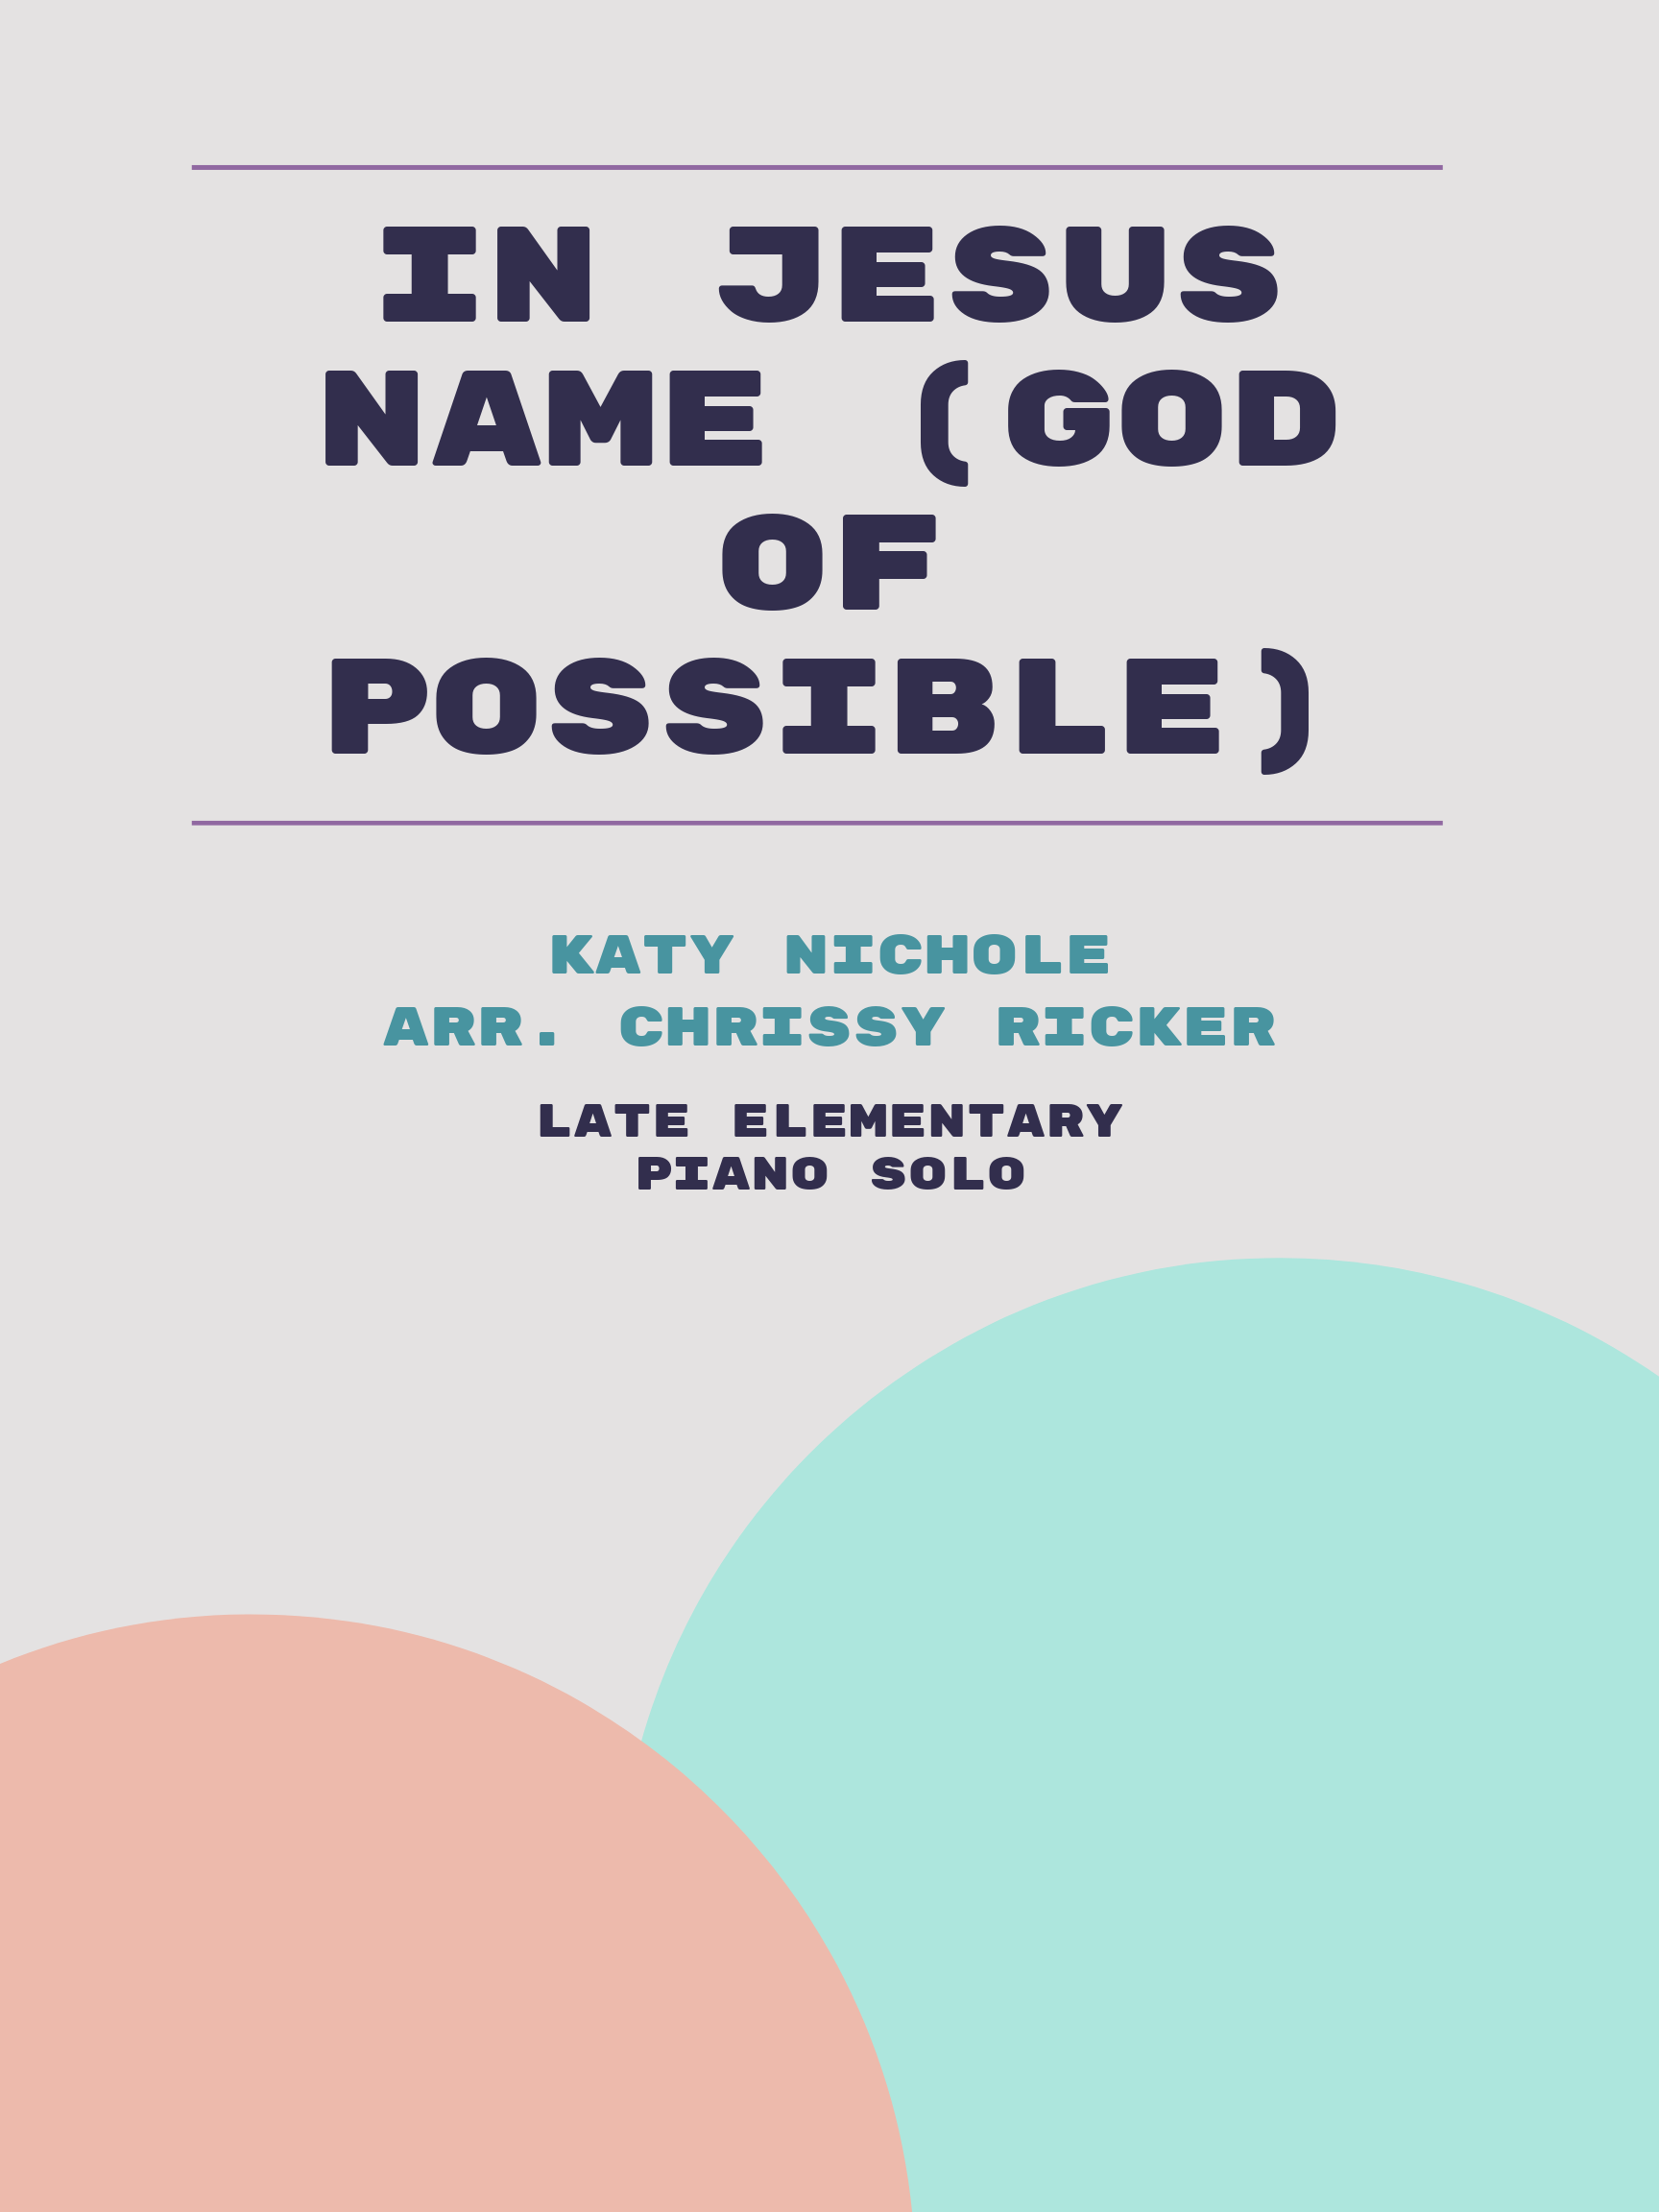 In Jesus Name (God of Possible) by Katy Nichole